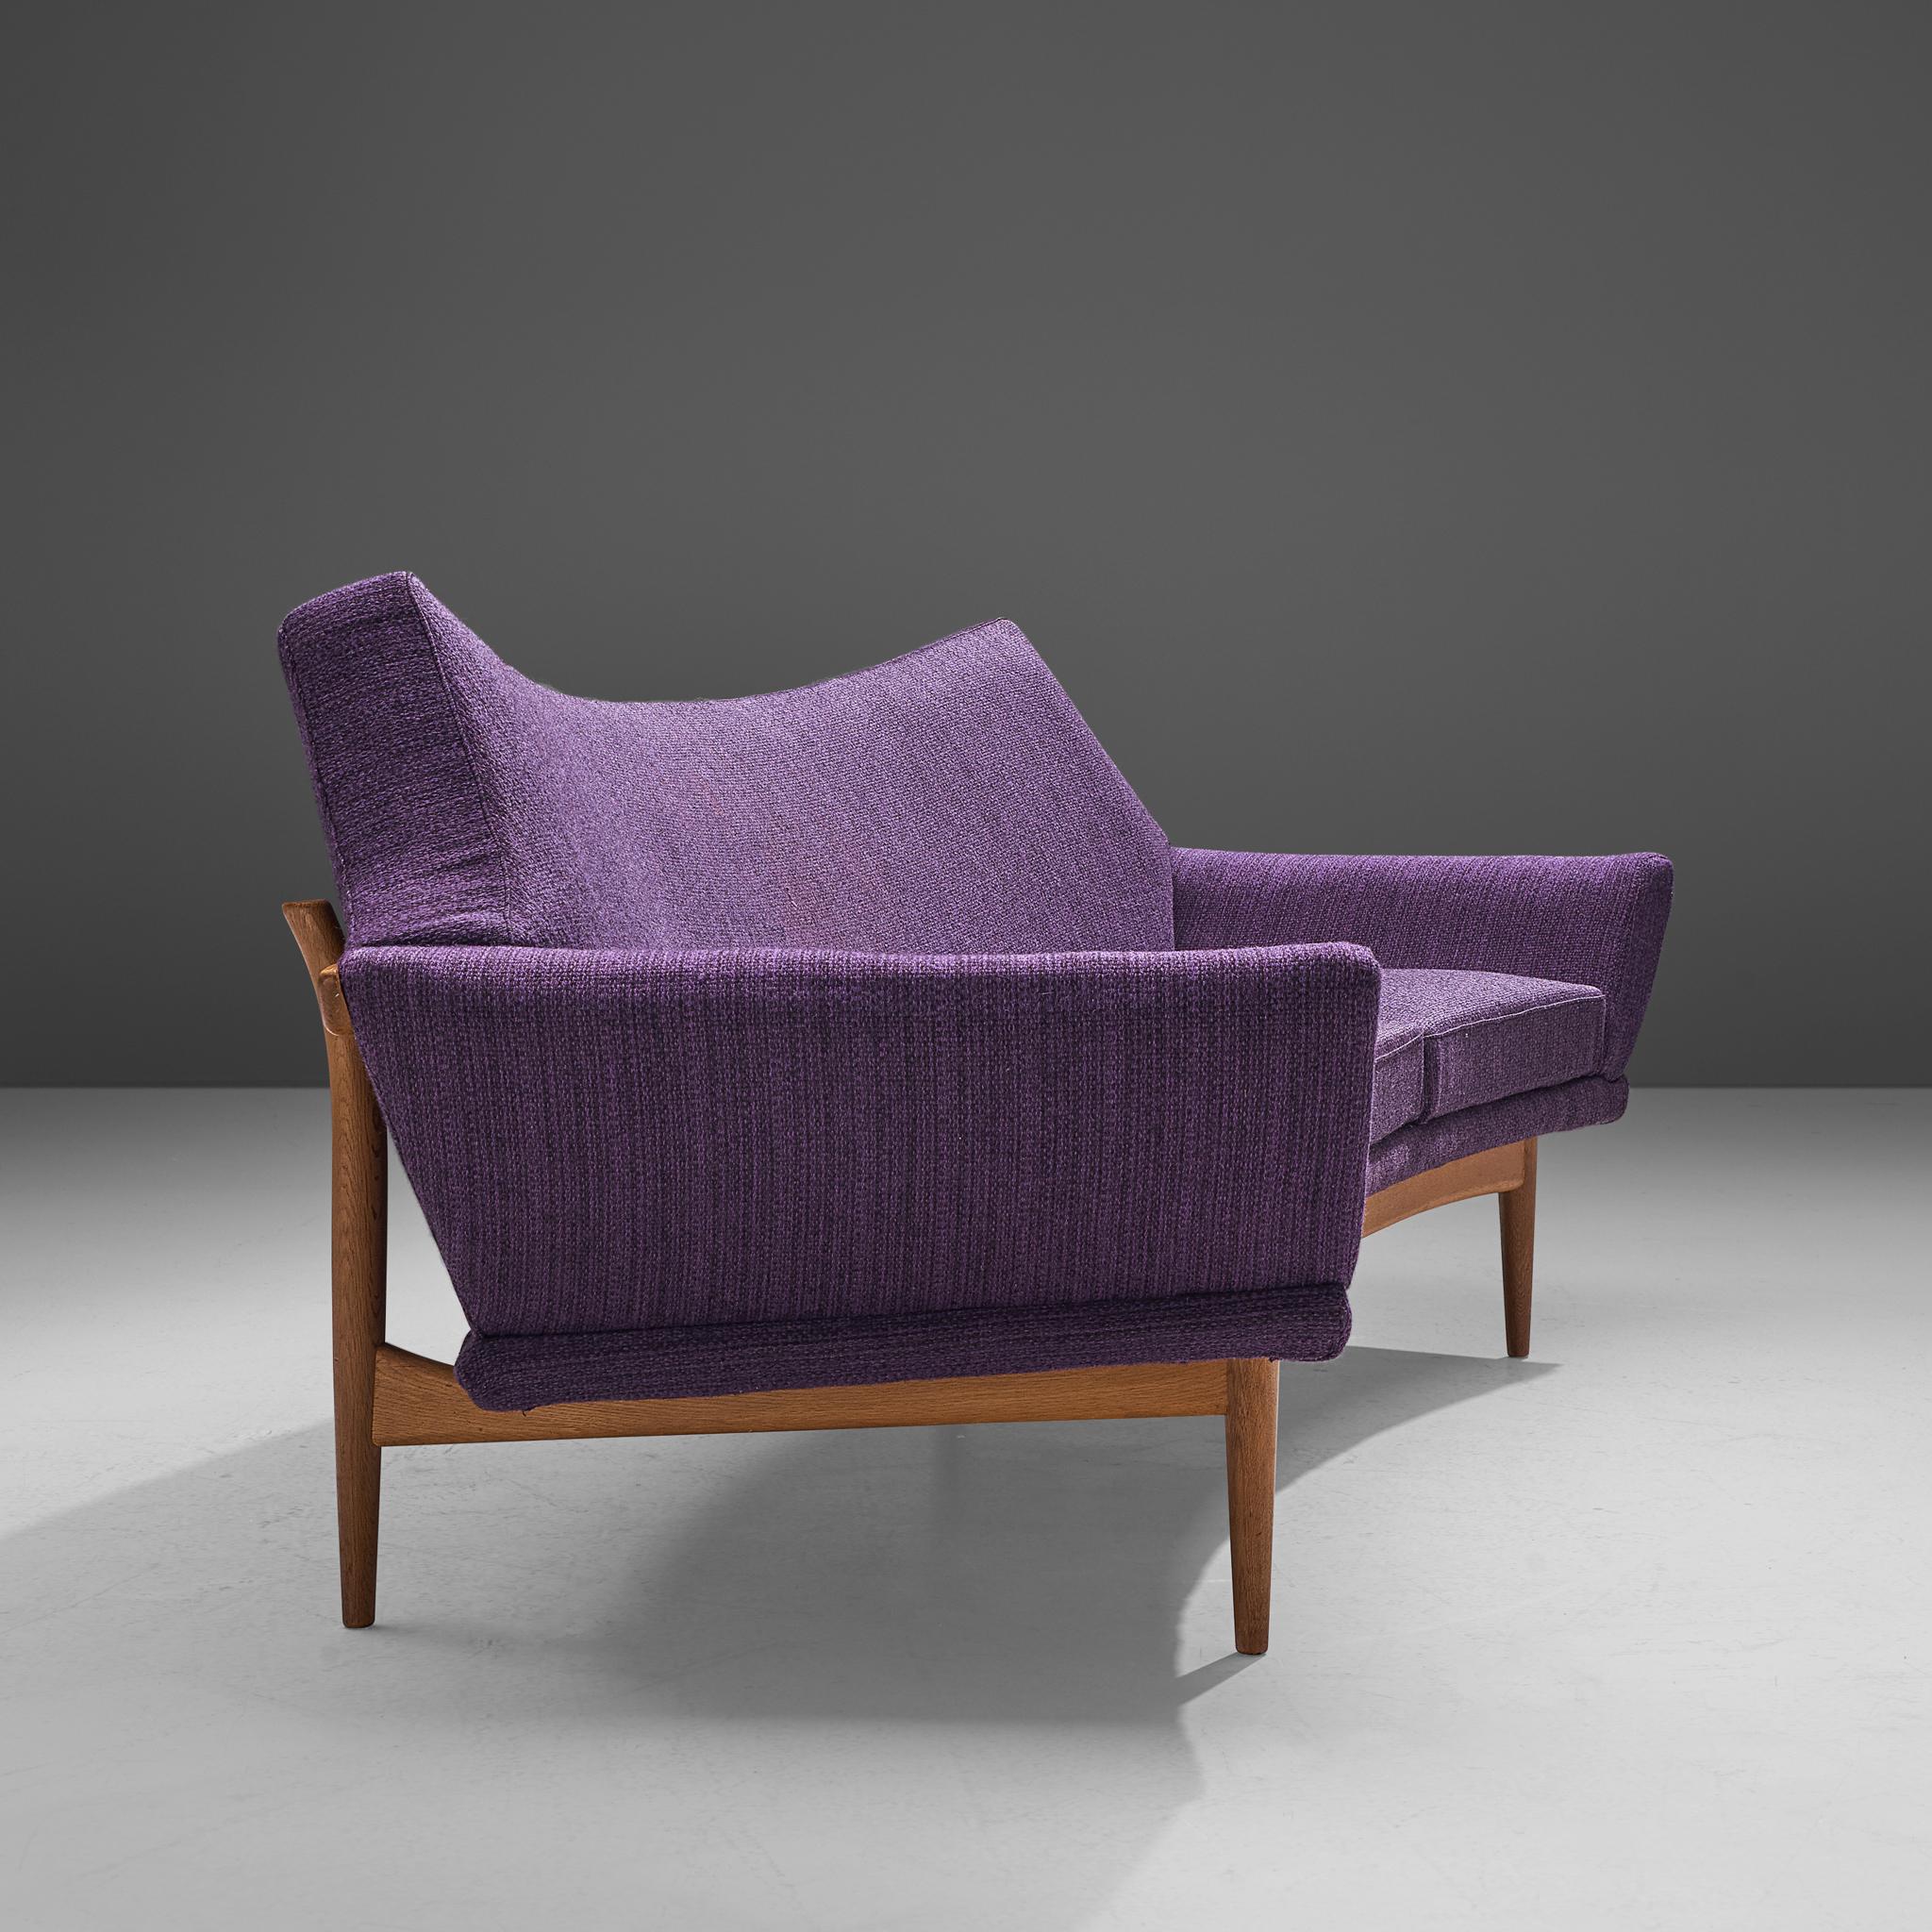 Mid-20th Century Johannes Andersen Curved Sofa in Royal Purple Upholstery